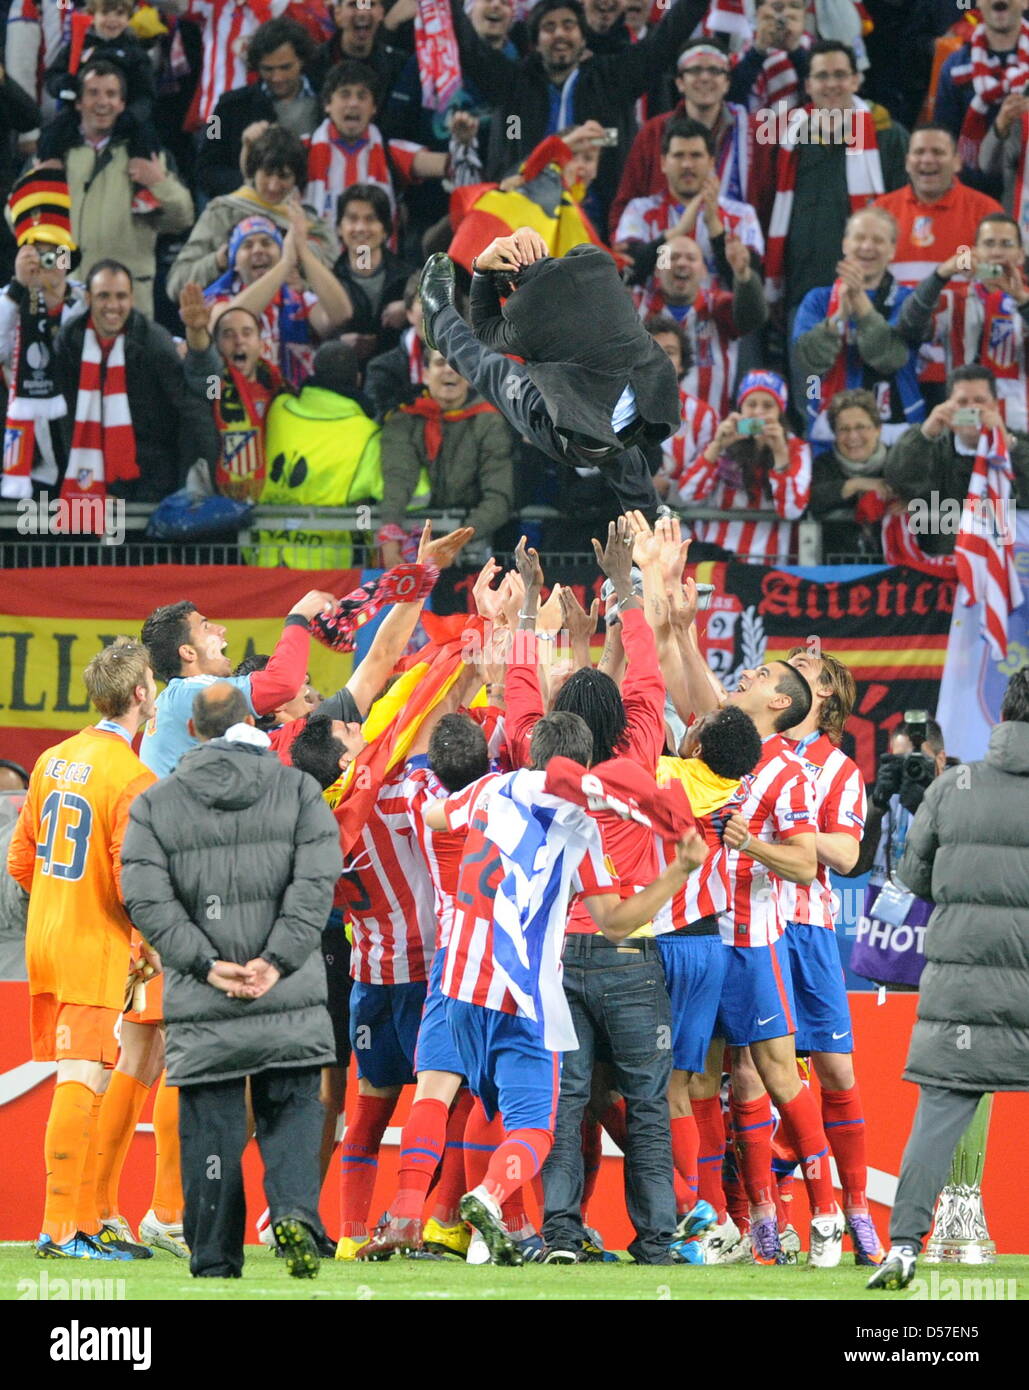 Players of Atletico Madrid celebrate their coach Quique Sanchez Flores fight for the ball during UEFA Europa League final match between FC Fulham and Atletico Madrid at Hamburg Arena, Hamburg, Germany, 12 May 2010. Photo: Marcus Brandt dpa NO MOBILE DEVICES  +++(c) dpa - Bildfunk+++ Stock Photo